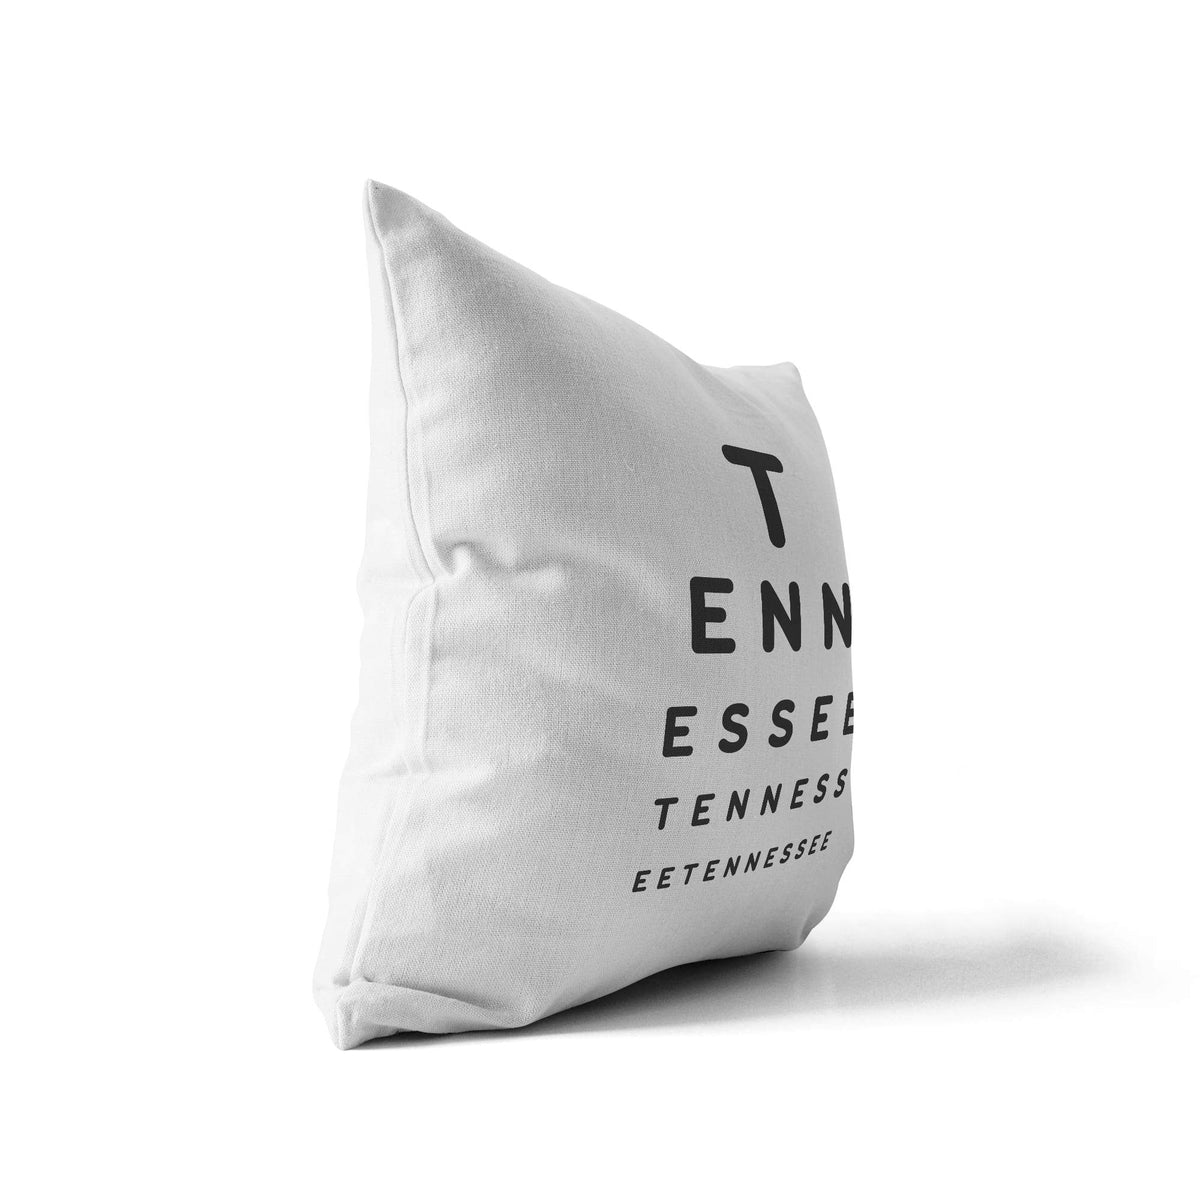 Tennessee &quot;Eye Exam&quot; Throw Pillow